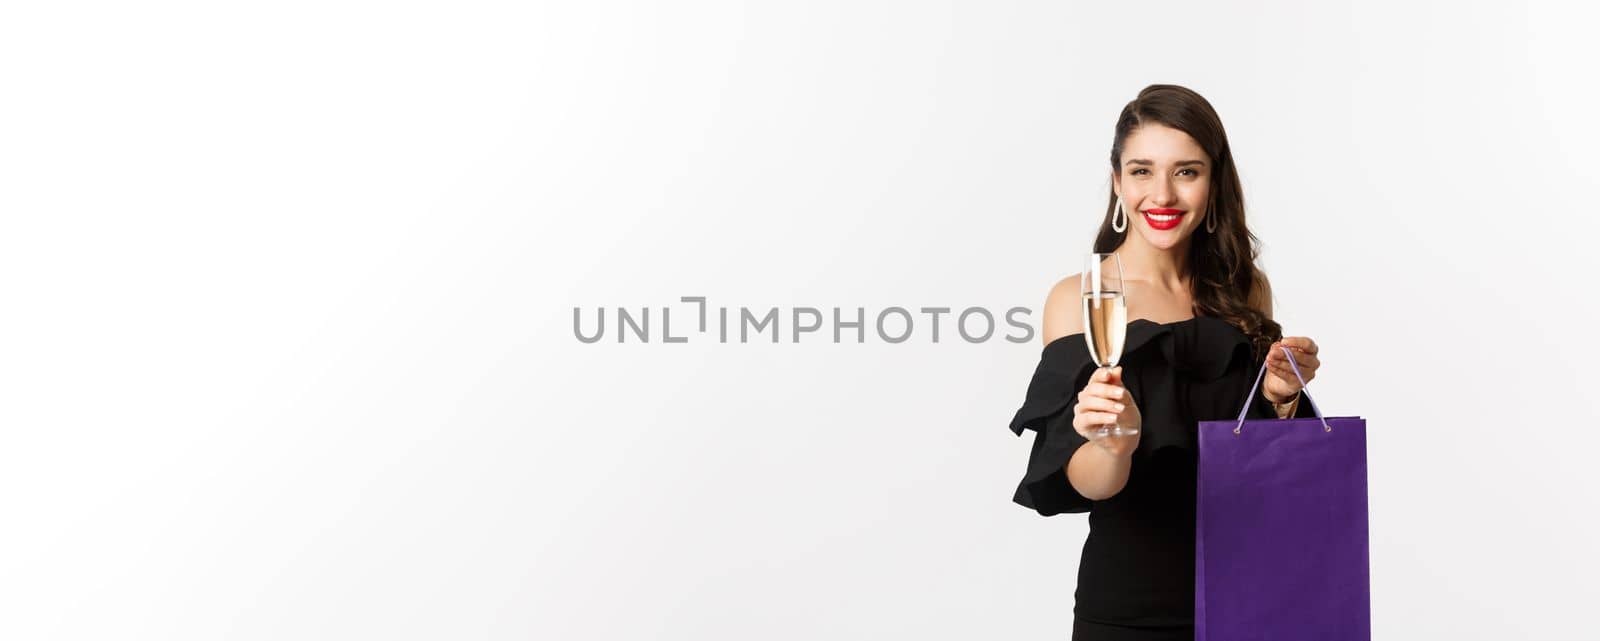 Beautiful and stylish brunette woman raising glass of champagne, celebrating christmas, holding shopping bag with presents, standing over white background.